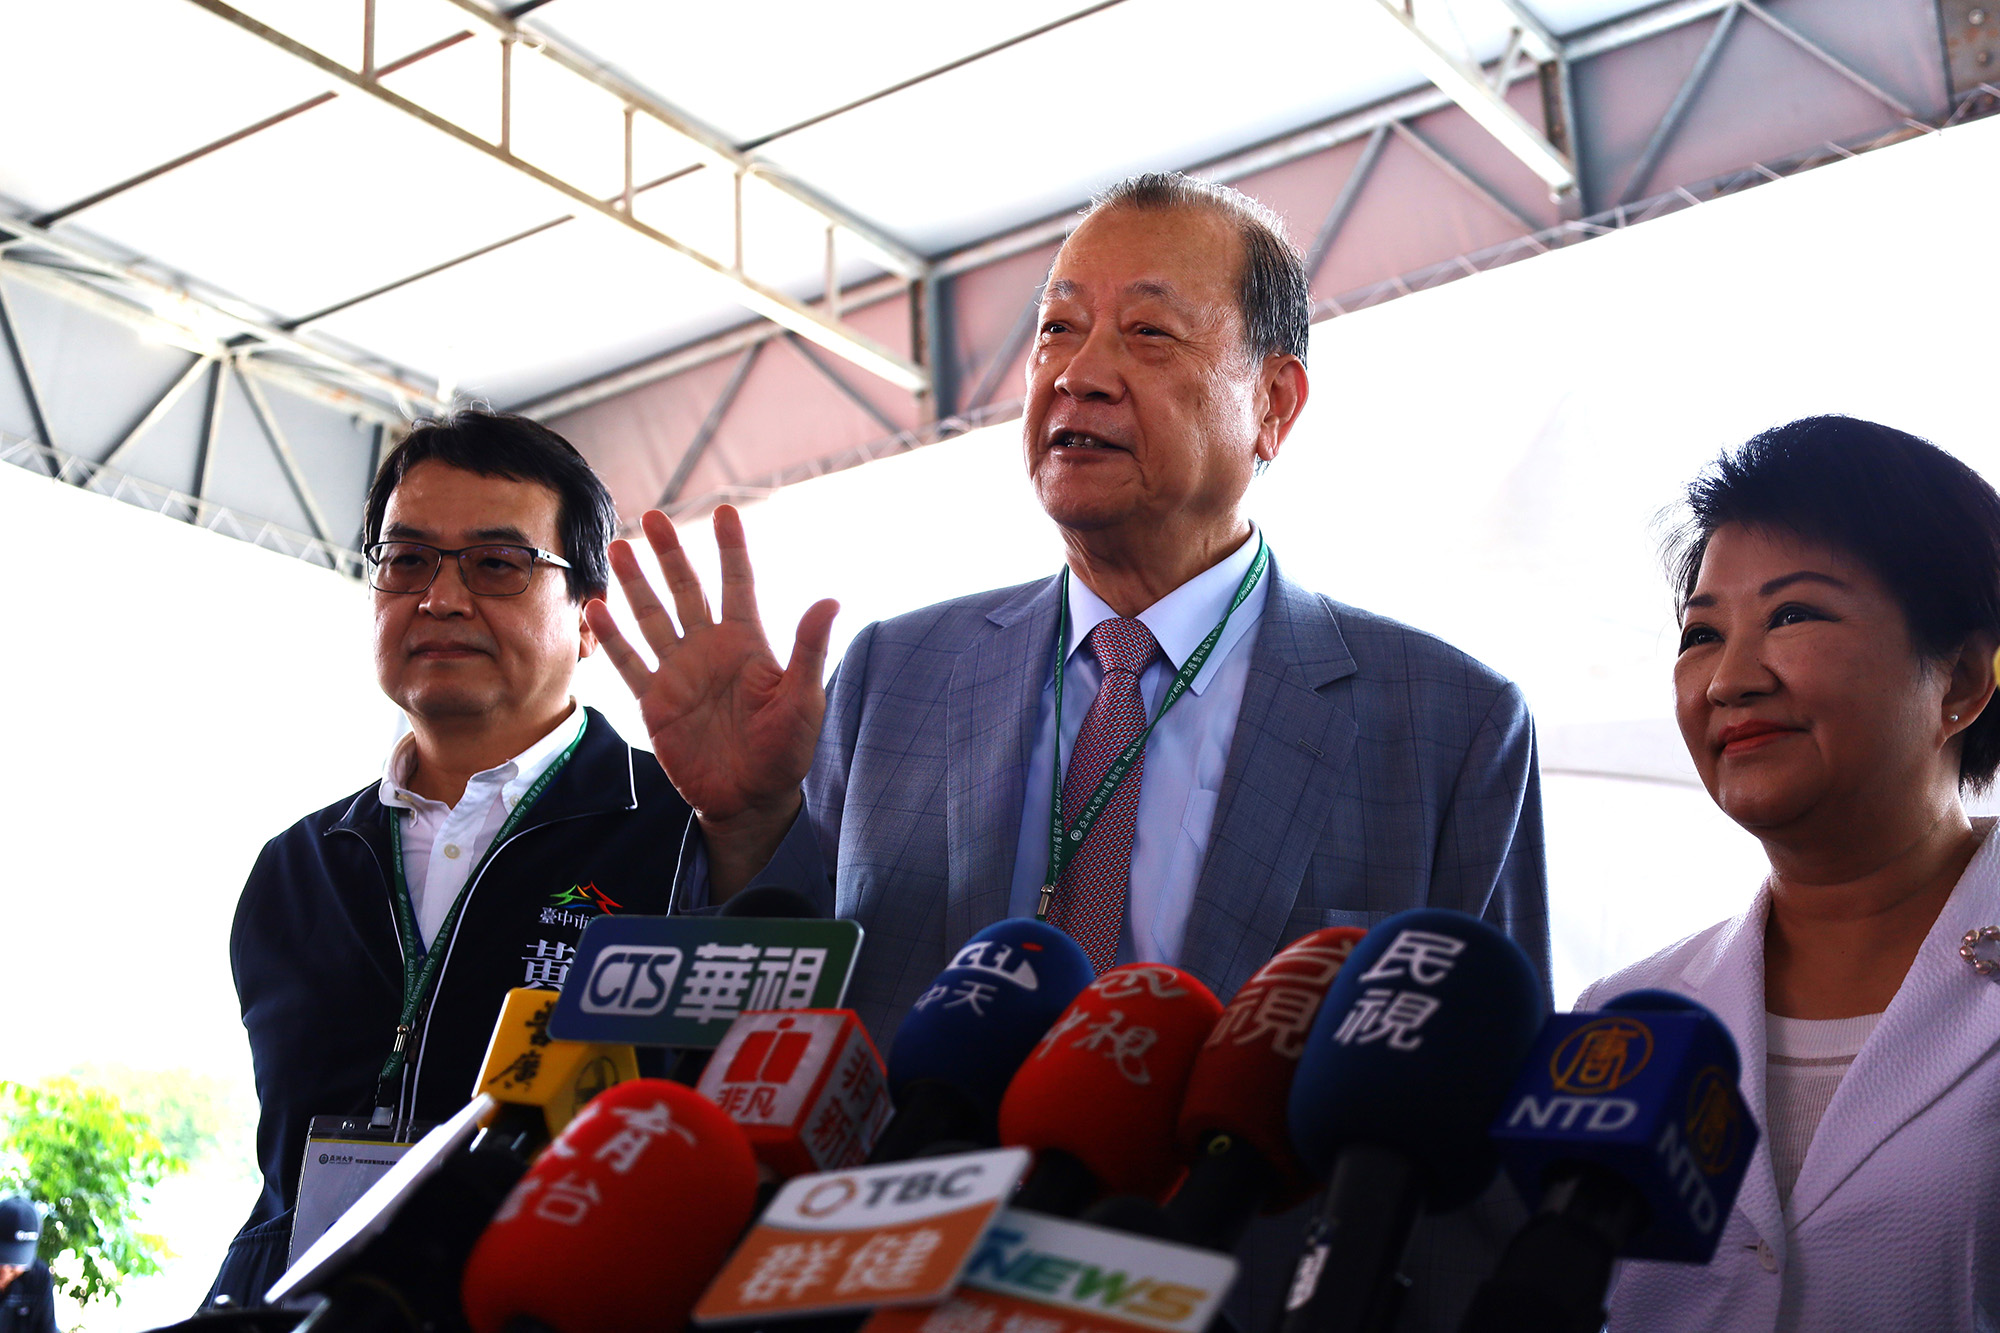 Chang-Hai Tsai, the founder of Asia University (middle), expressing plans to invest 7.5 billion NTD to build the "Asia University Fengfu Health Park"; Mayor Hsiu-Yen Lu of Taichung City (right) remarked, "Taichung City gains!"